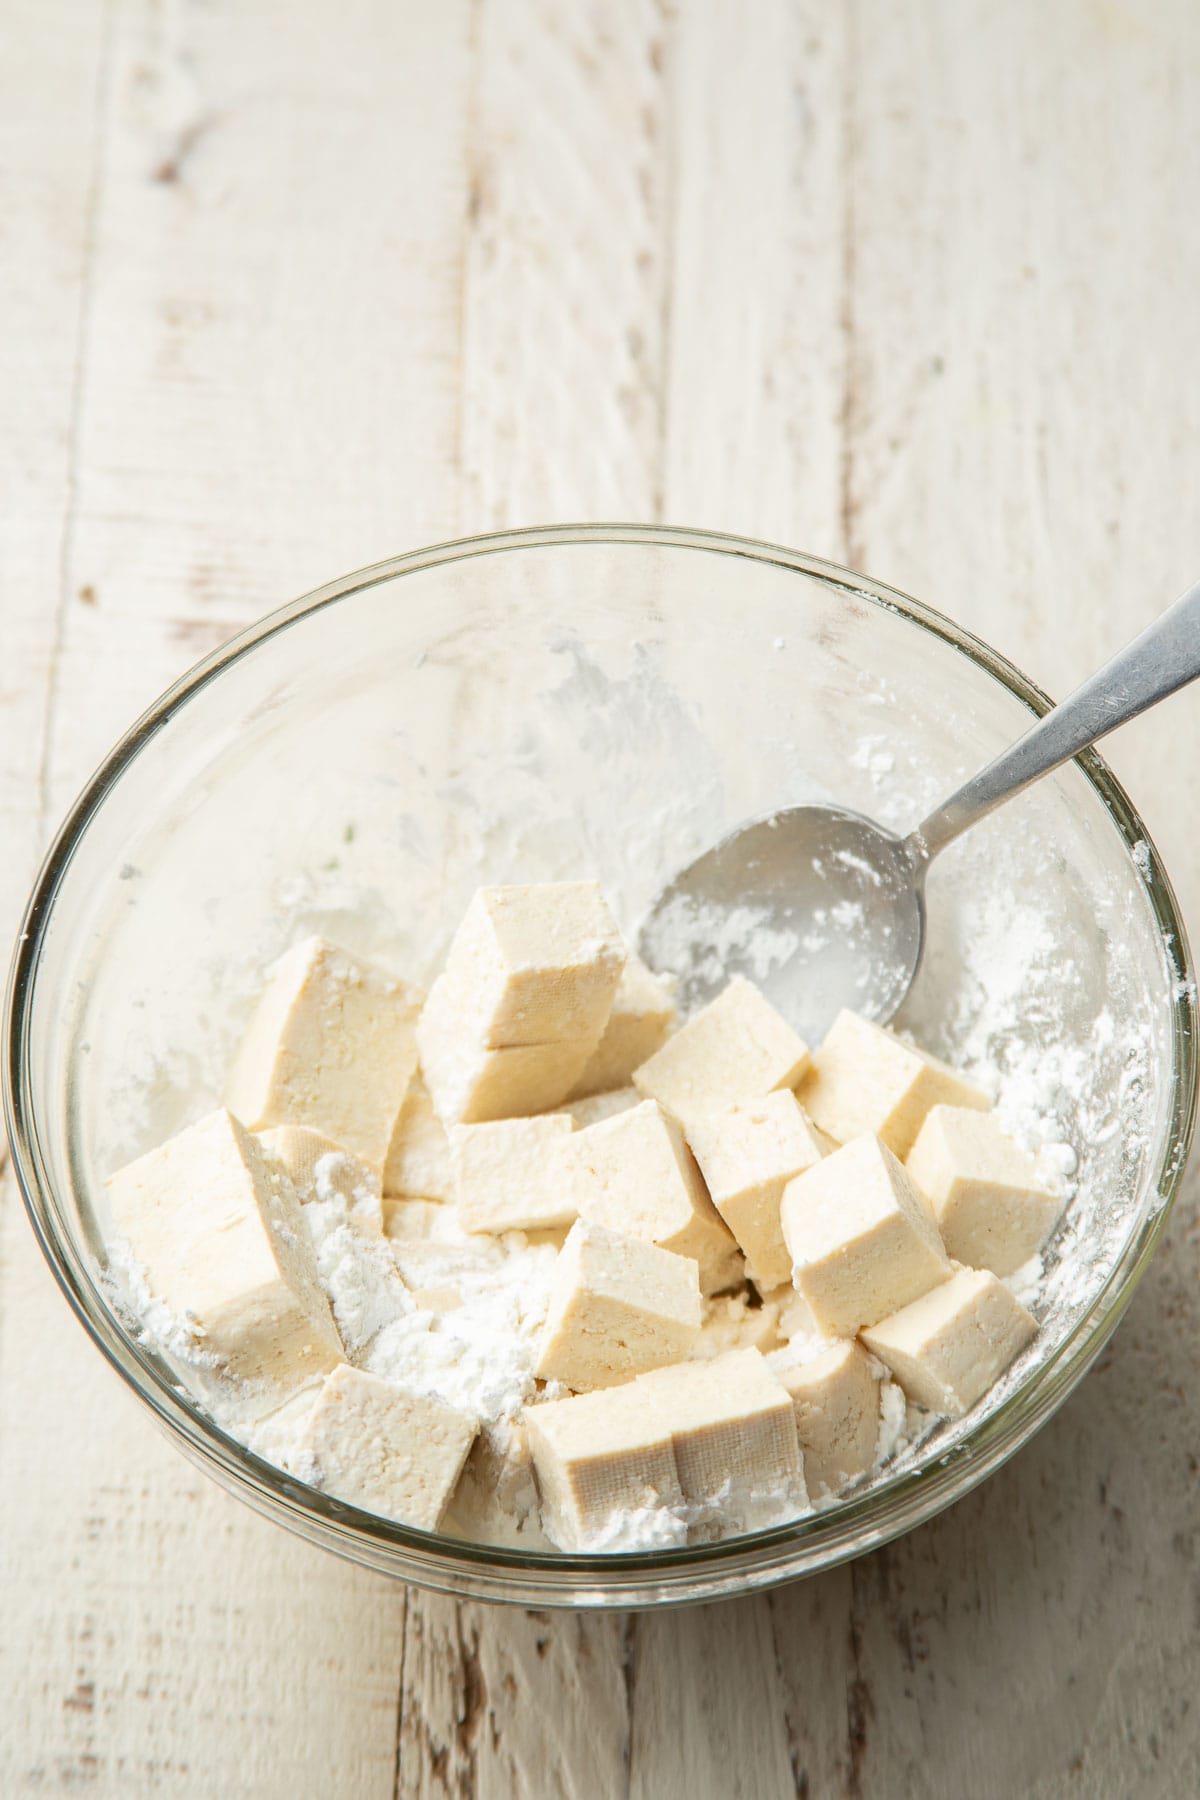 Tofu cubes in a bowl of cornstarch with a spoon.